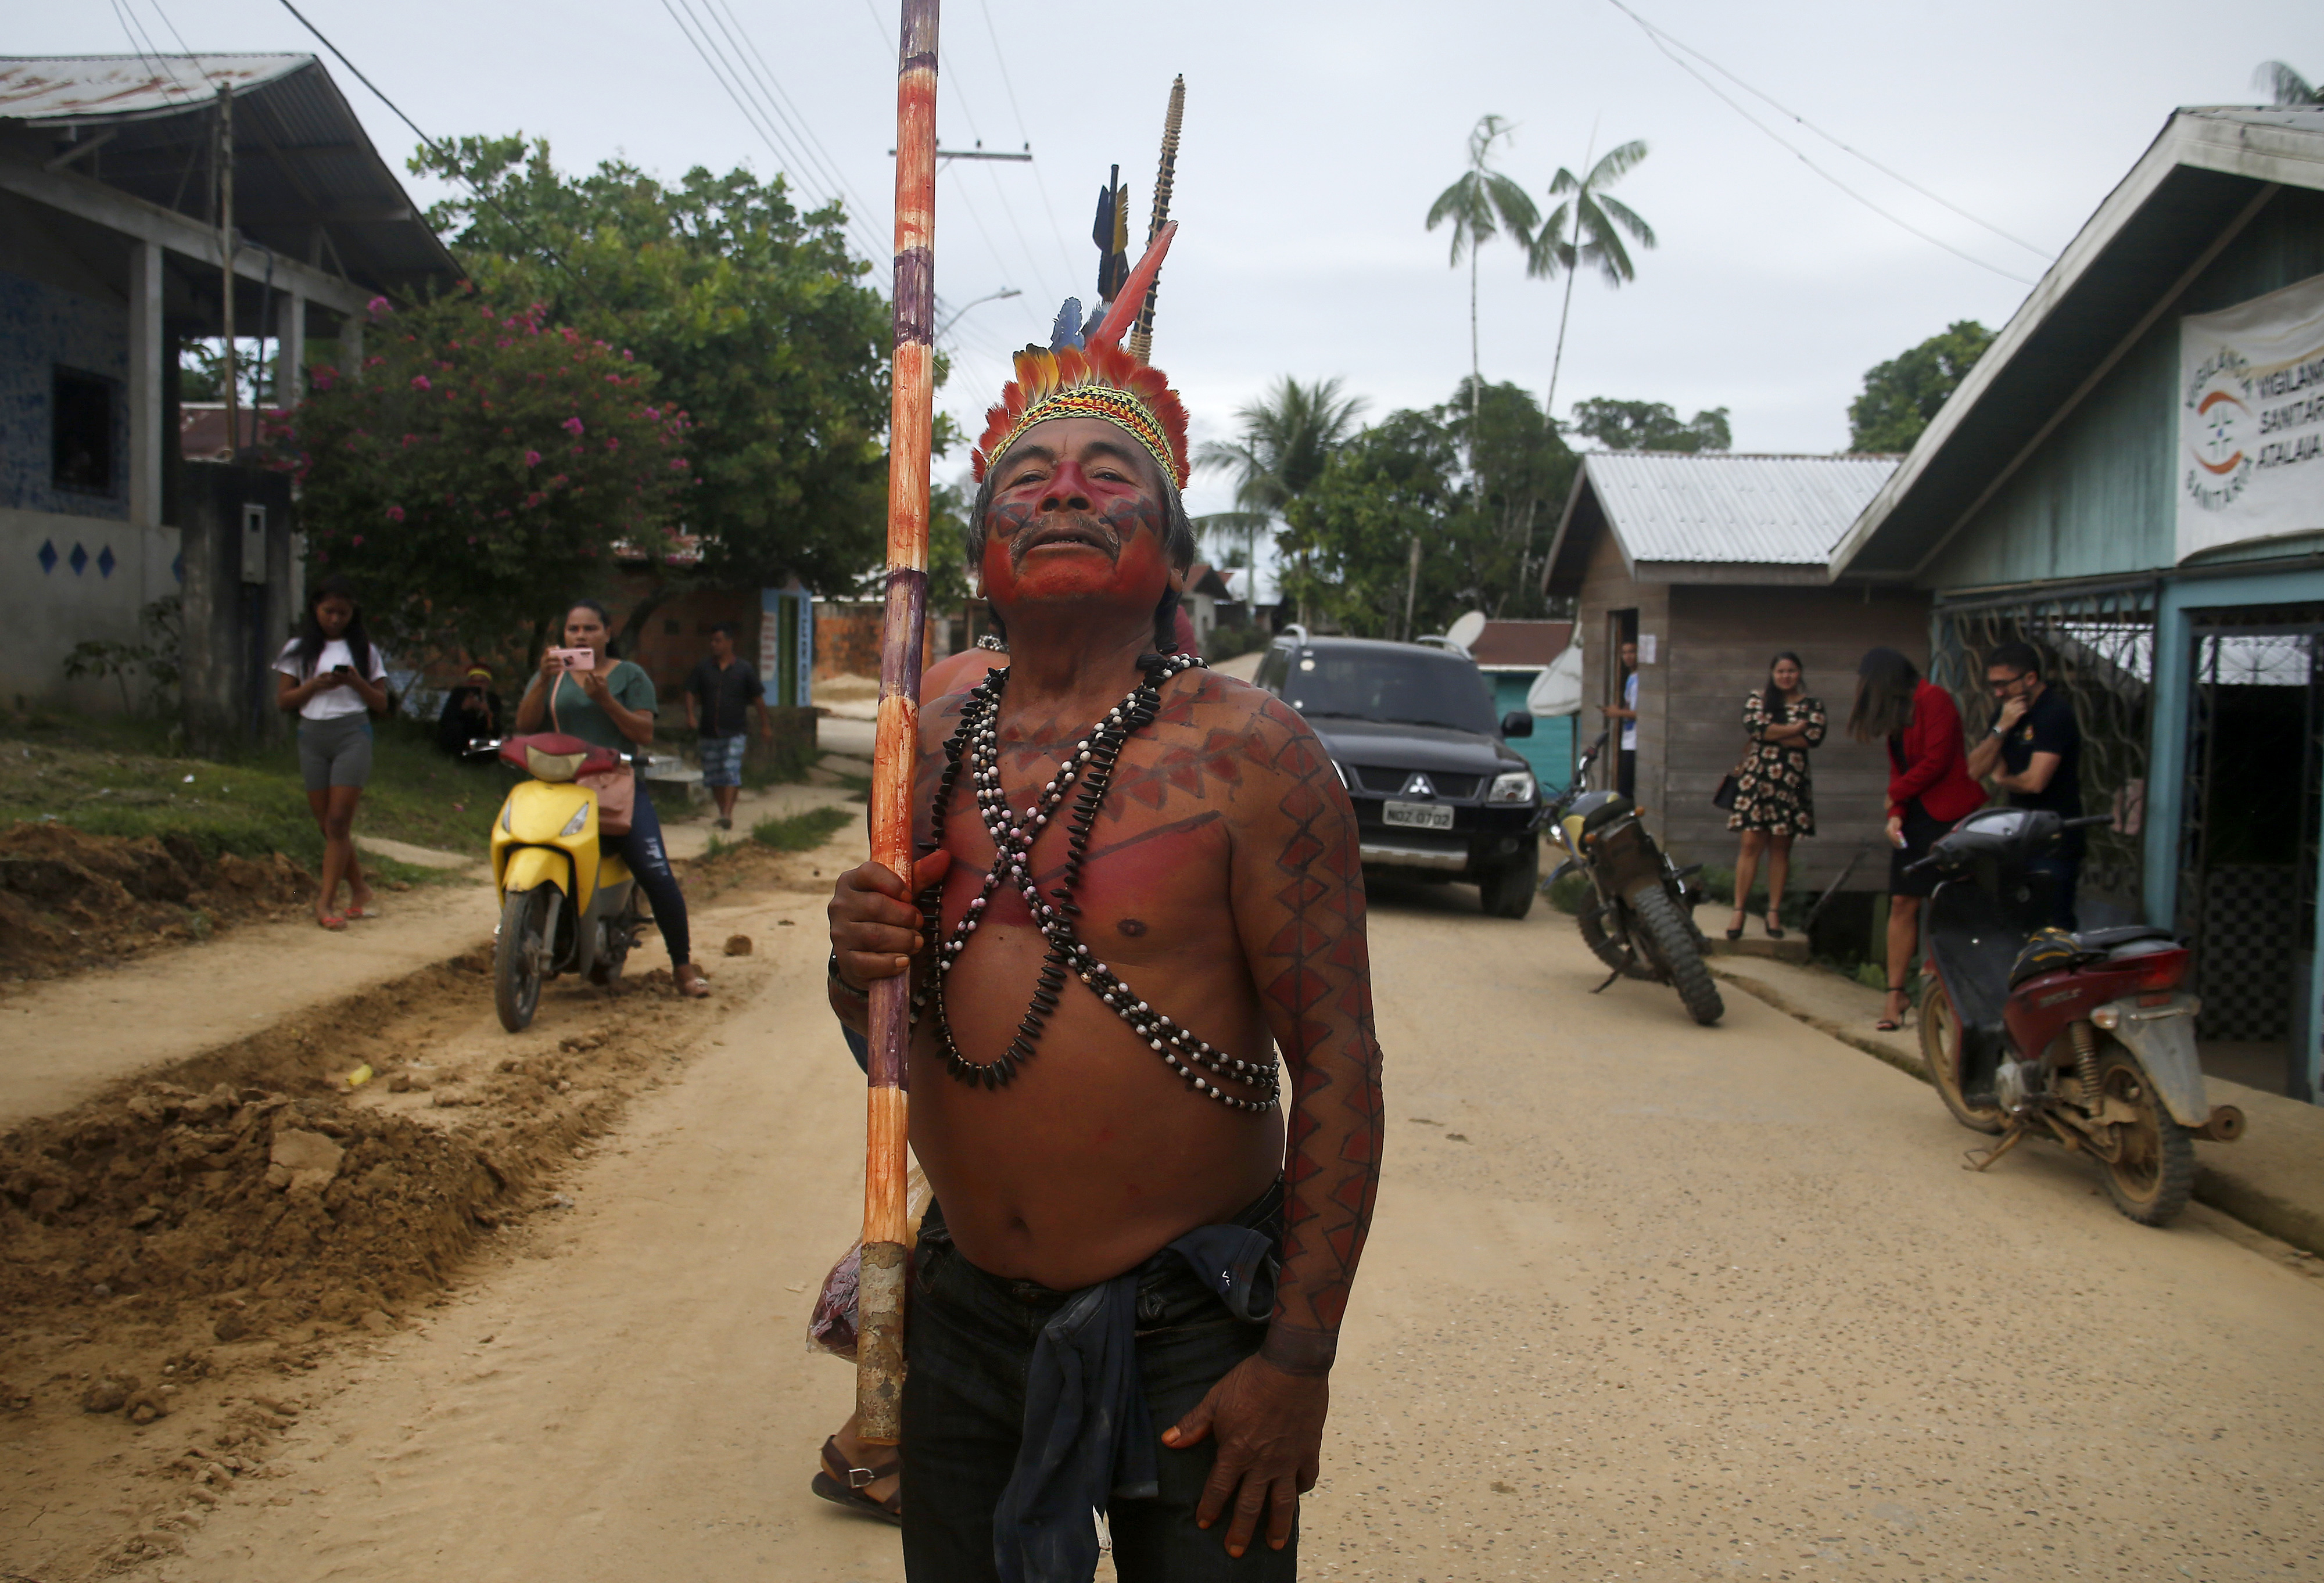 Migration of Brazil's Indigenous youth to cities concerns elders 